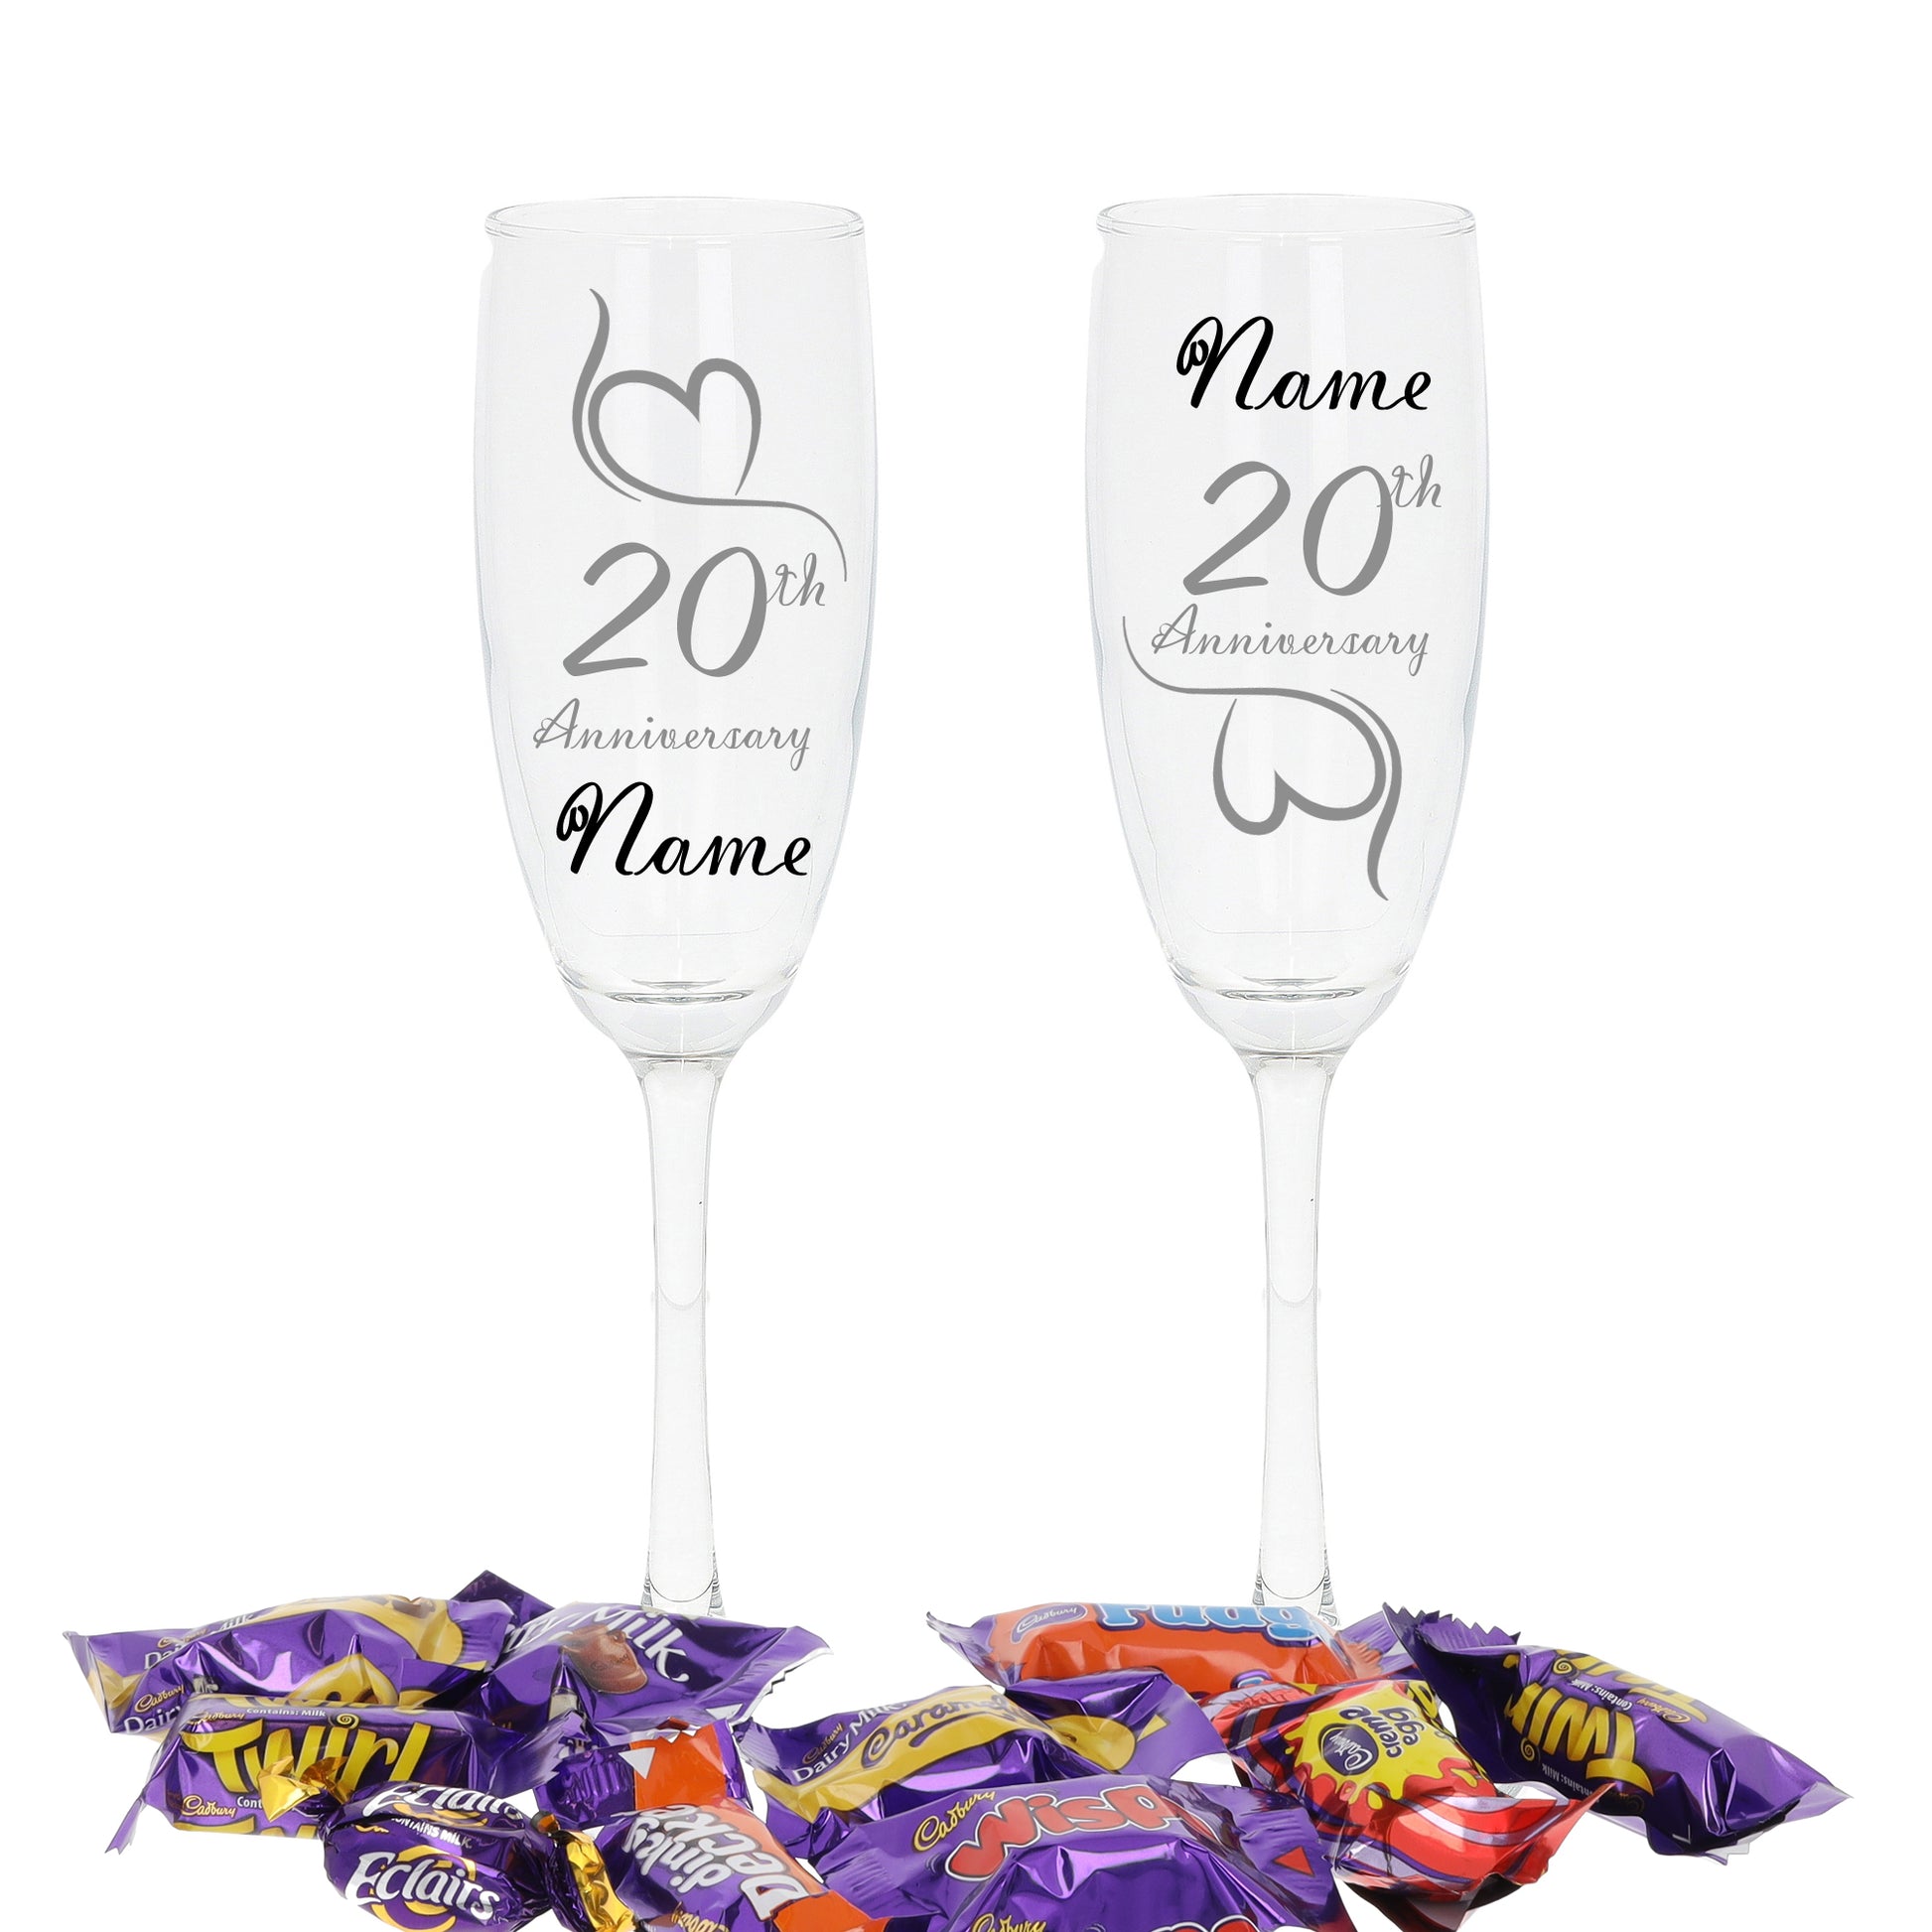 Engraved 20th China Wedding Anniversary Personalised Engraved Champagne Glass Gift Set  - Always Looking Good -   